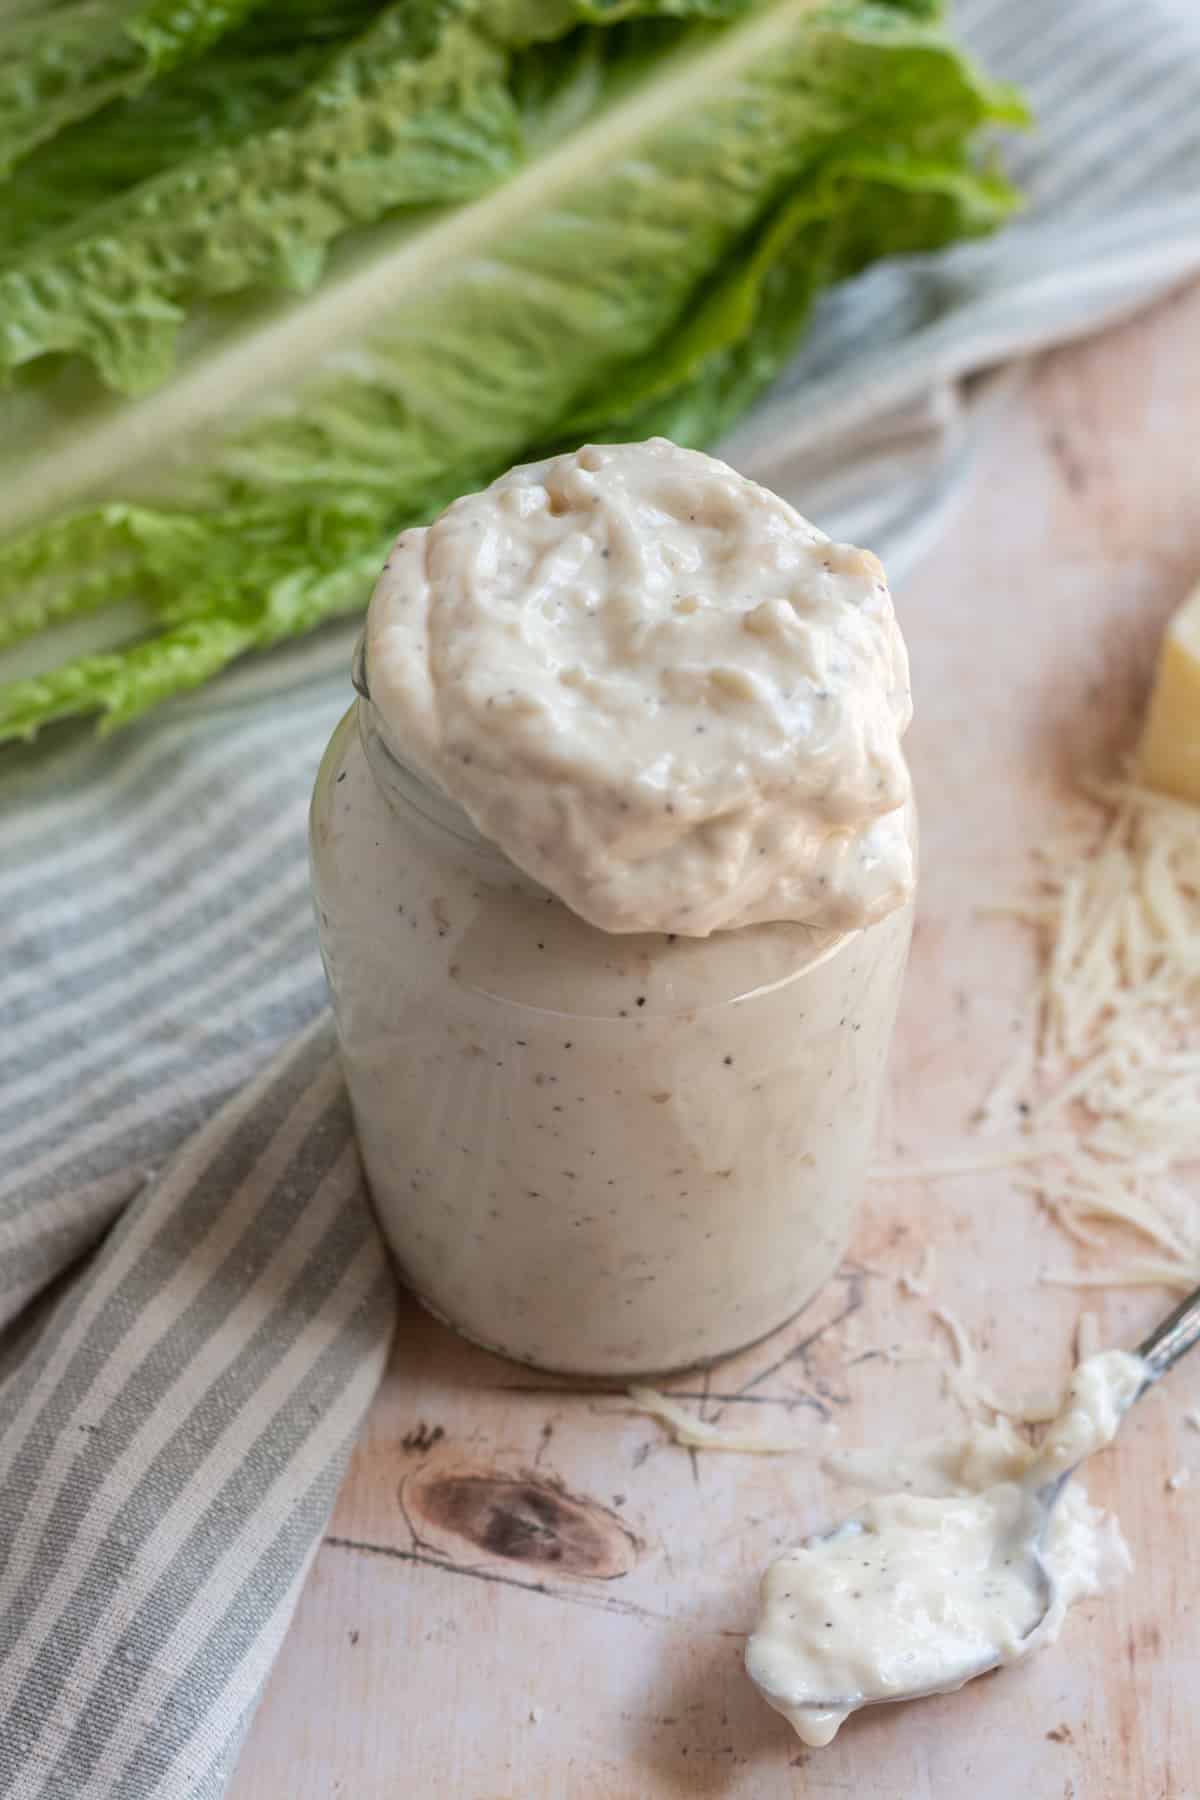 Small glass jar of Caesar dressing without anchovies with a spoon on the table, lettuce leaves in the background, a striped towel in the background, and shredded parmesan cheese around the jar.